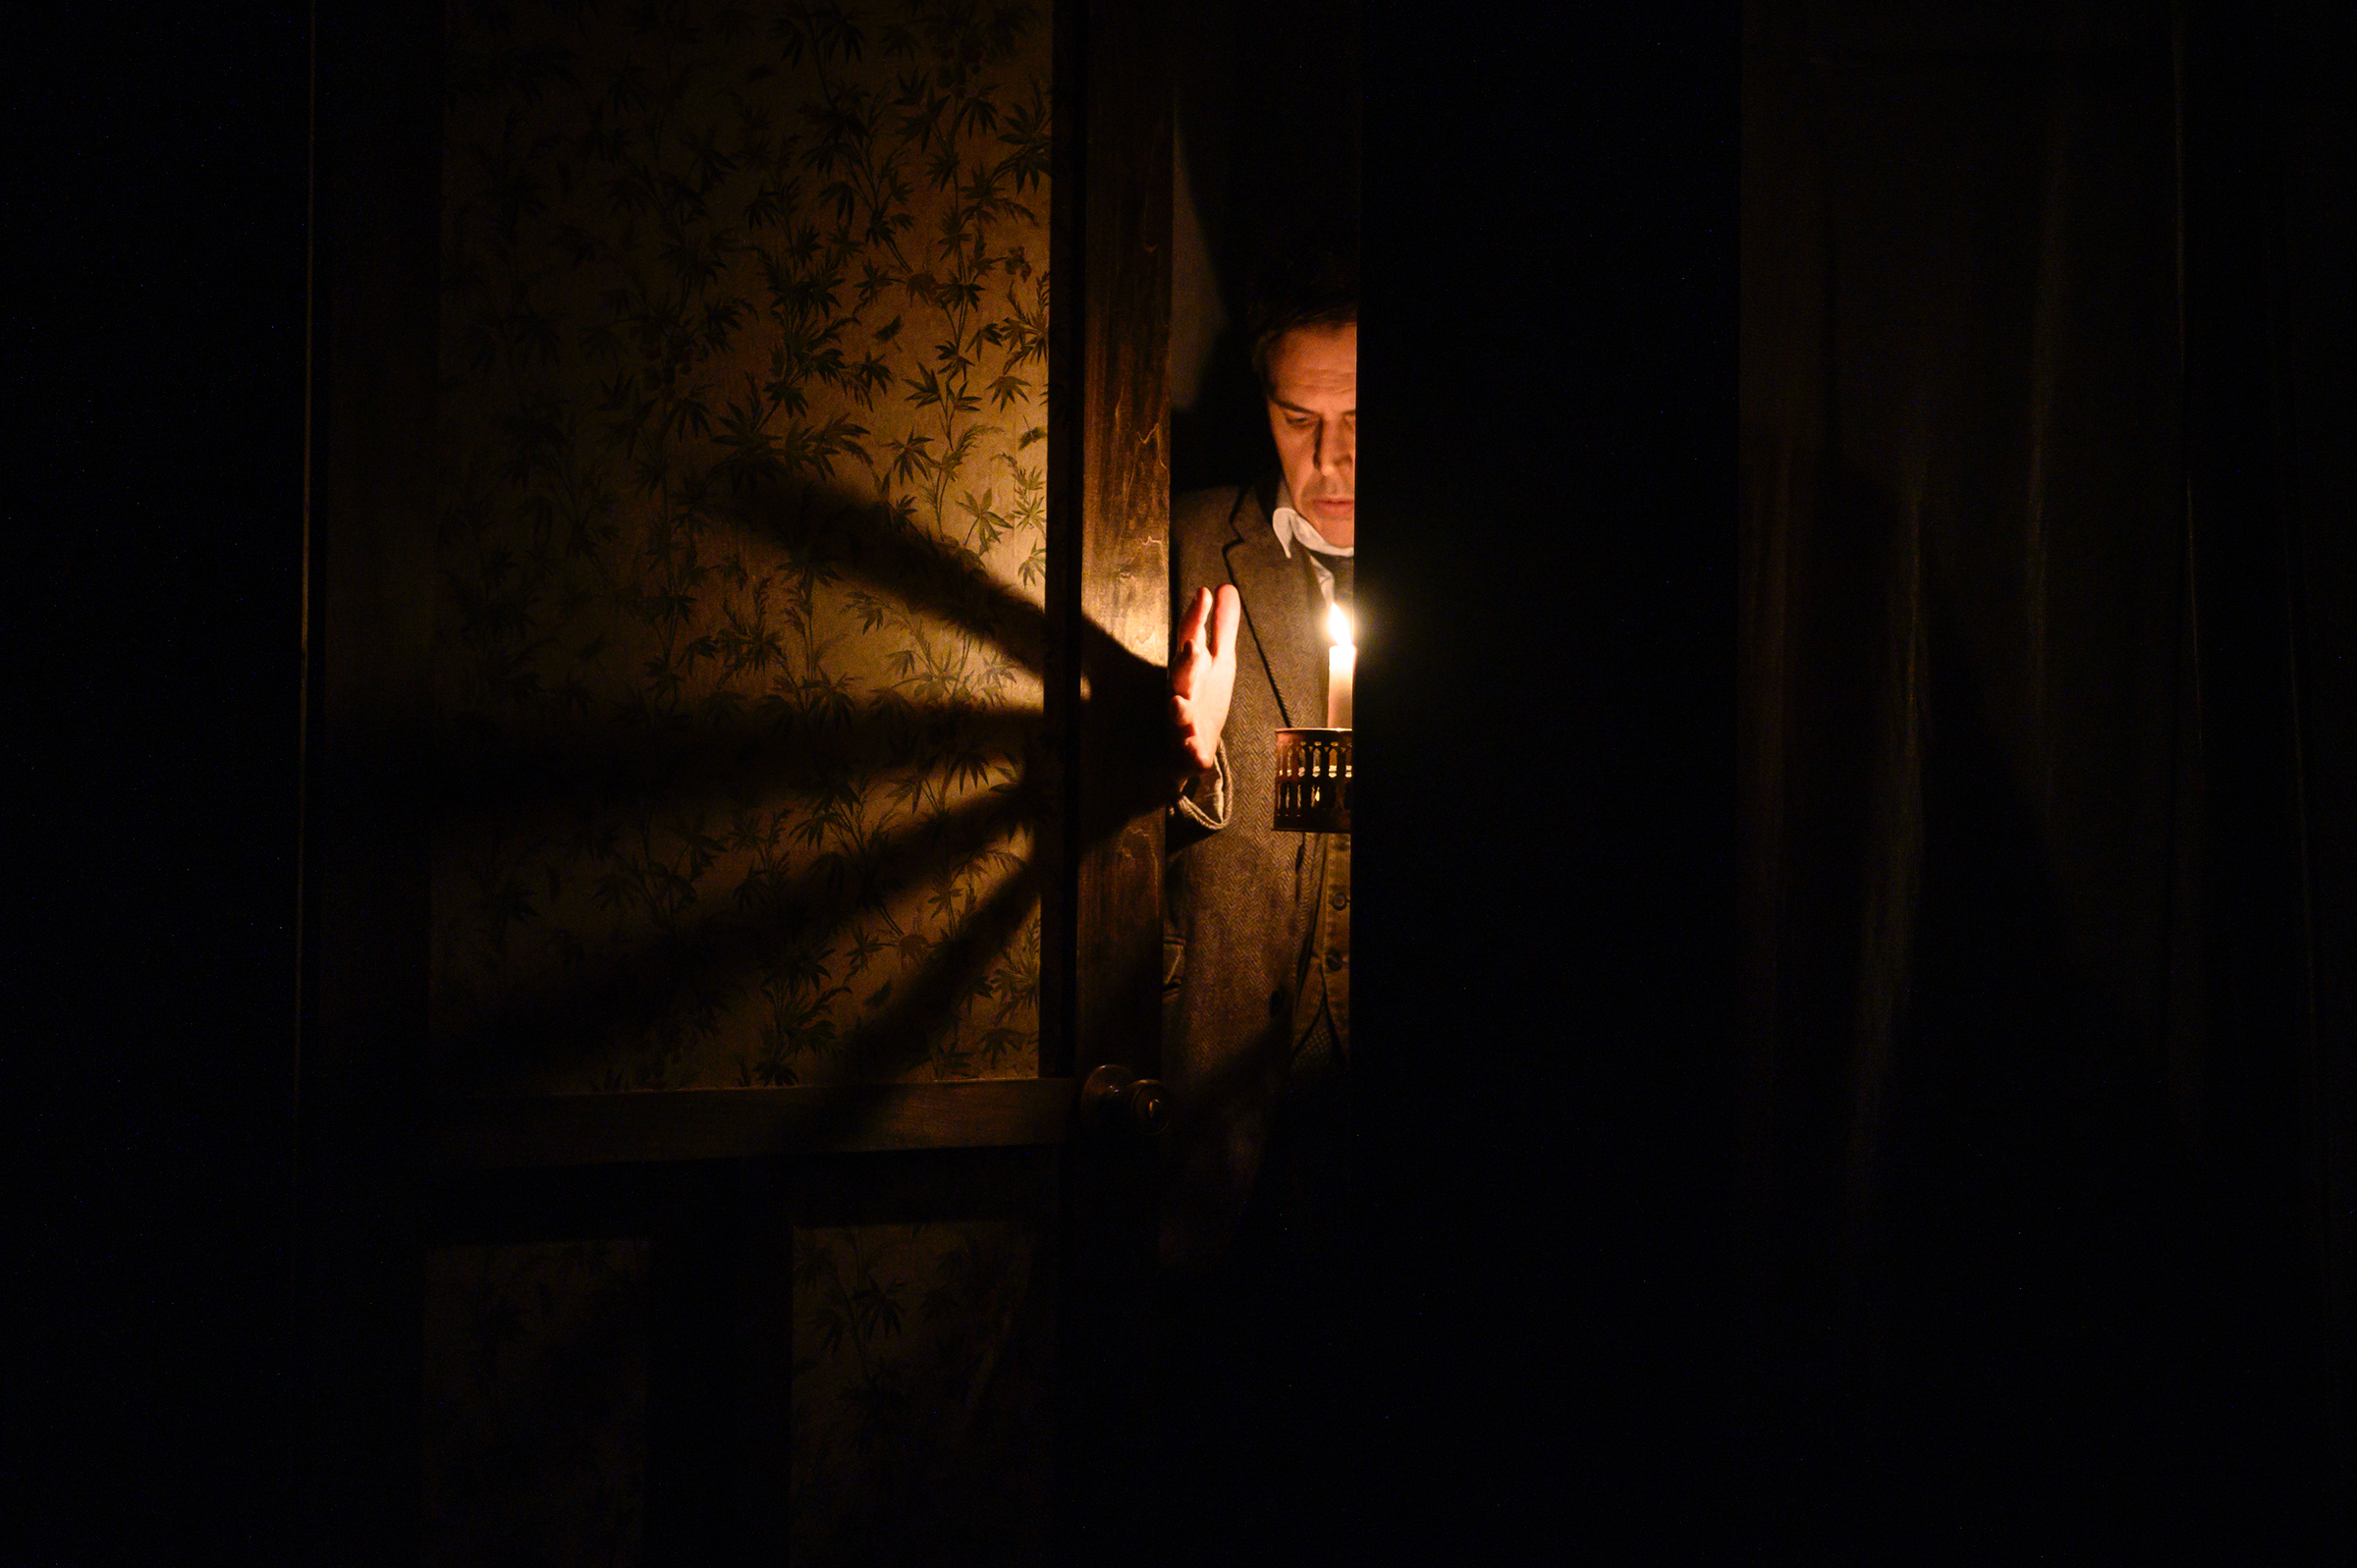 Ben Porter holds a candle and casts a shadow of his hand across the wall in "The Woman in Black" at the McKittrick Hotel.